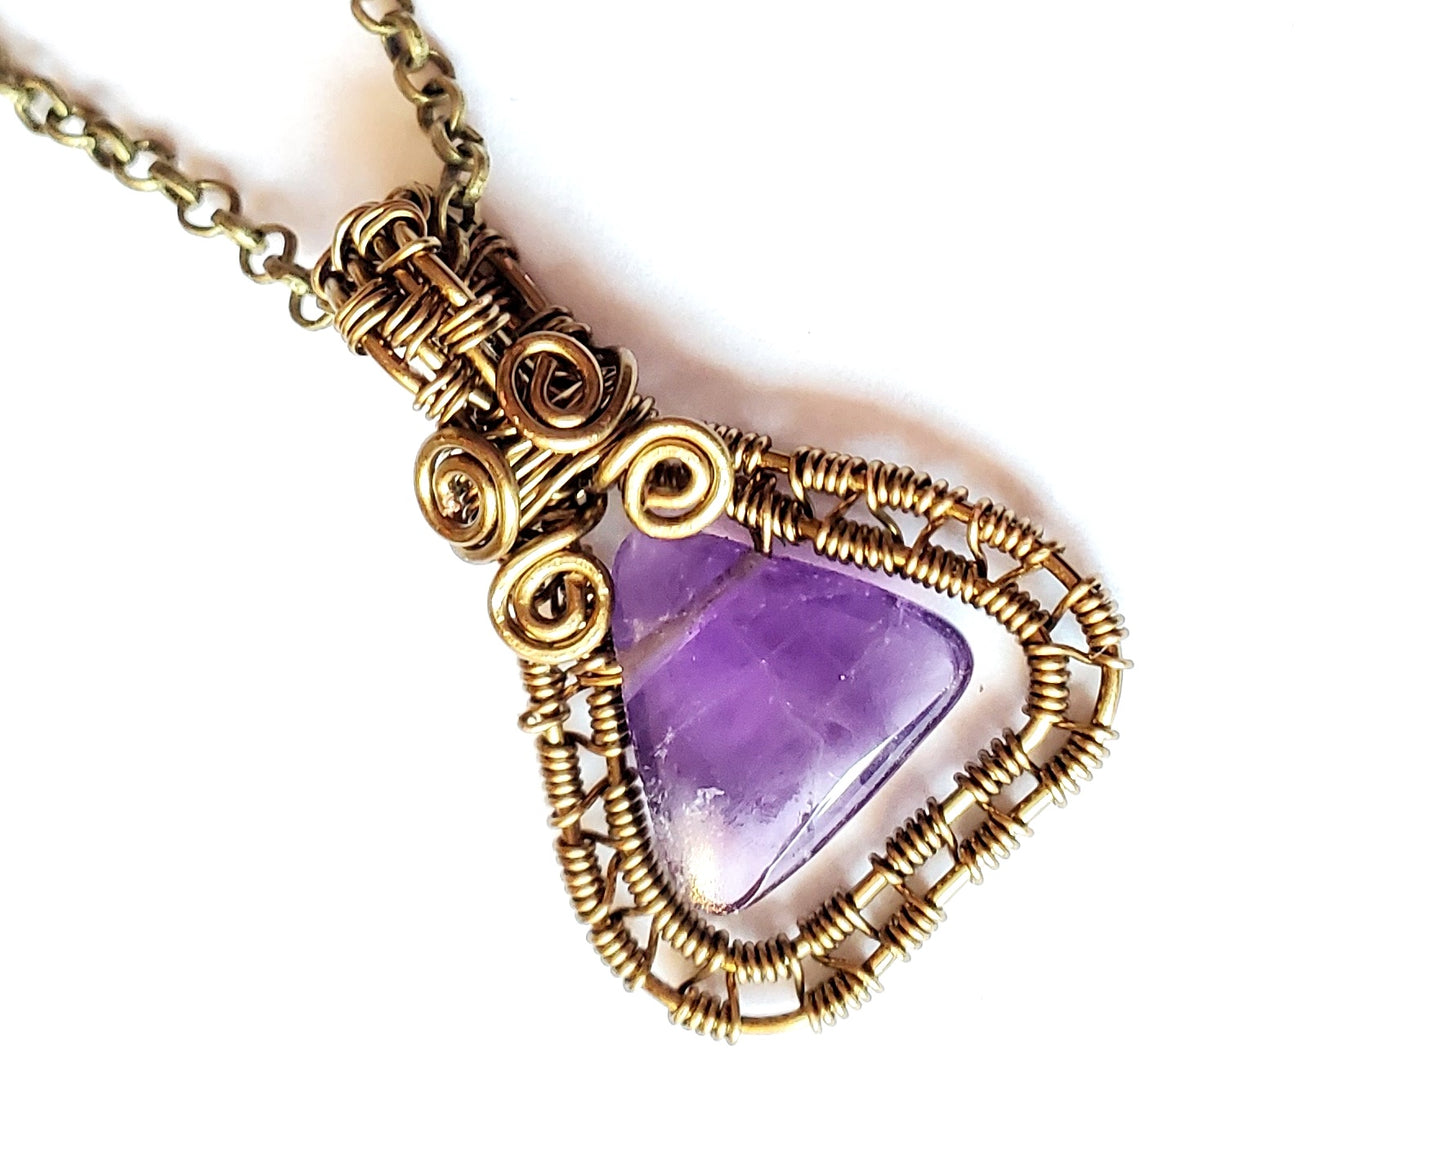 Peaceful Purple Amethyst Pendant, Triangle shaped Genuine Amethyst, Wire Wrapped with Antiqued on Chain